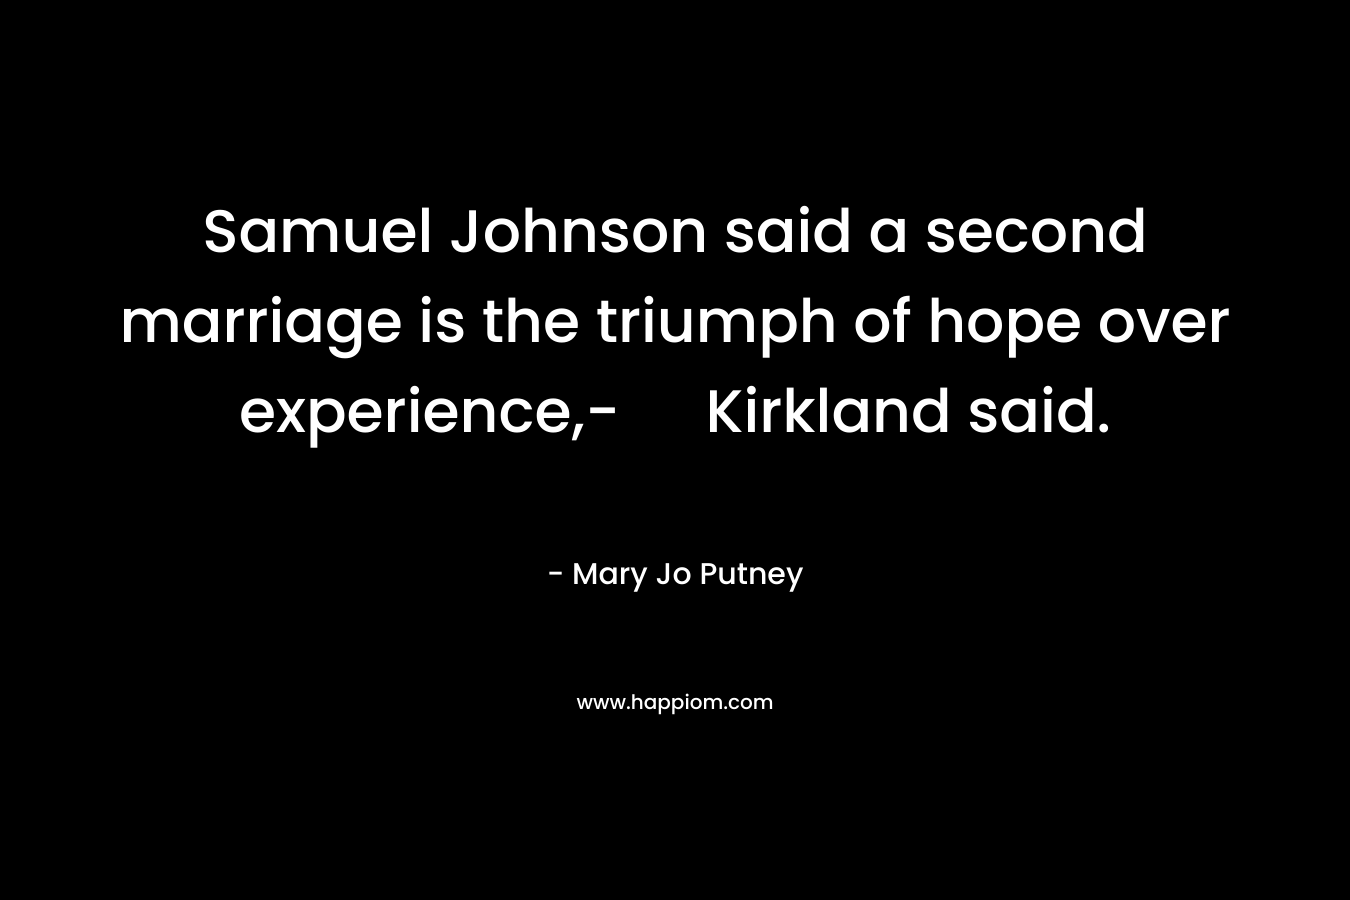 Samuel Johnson said a second marriage is the triumph of hope over experience,- Kirkland said.